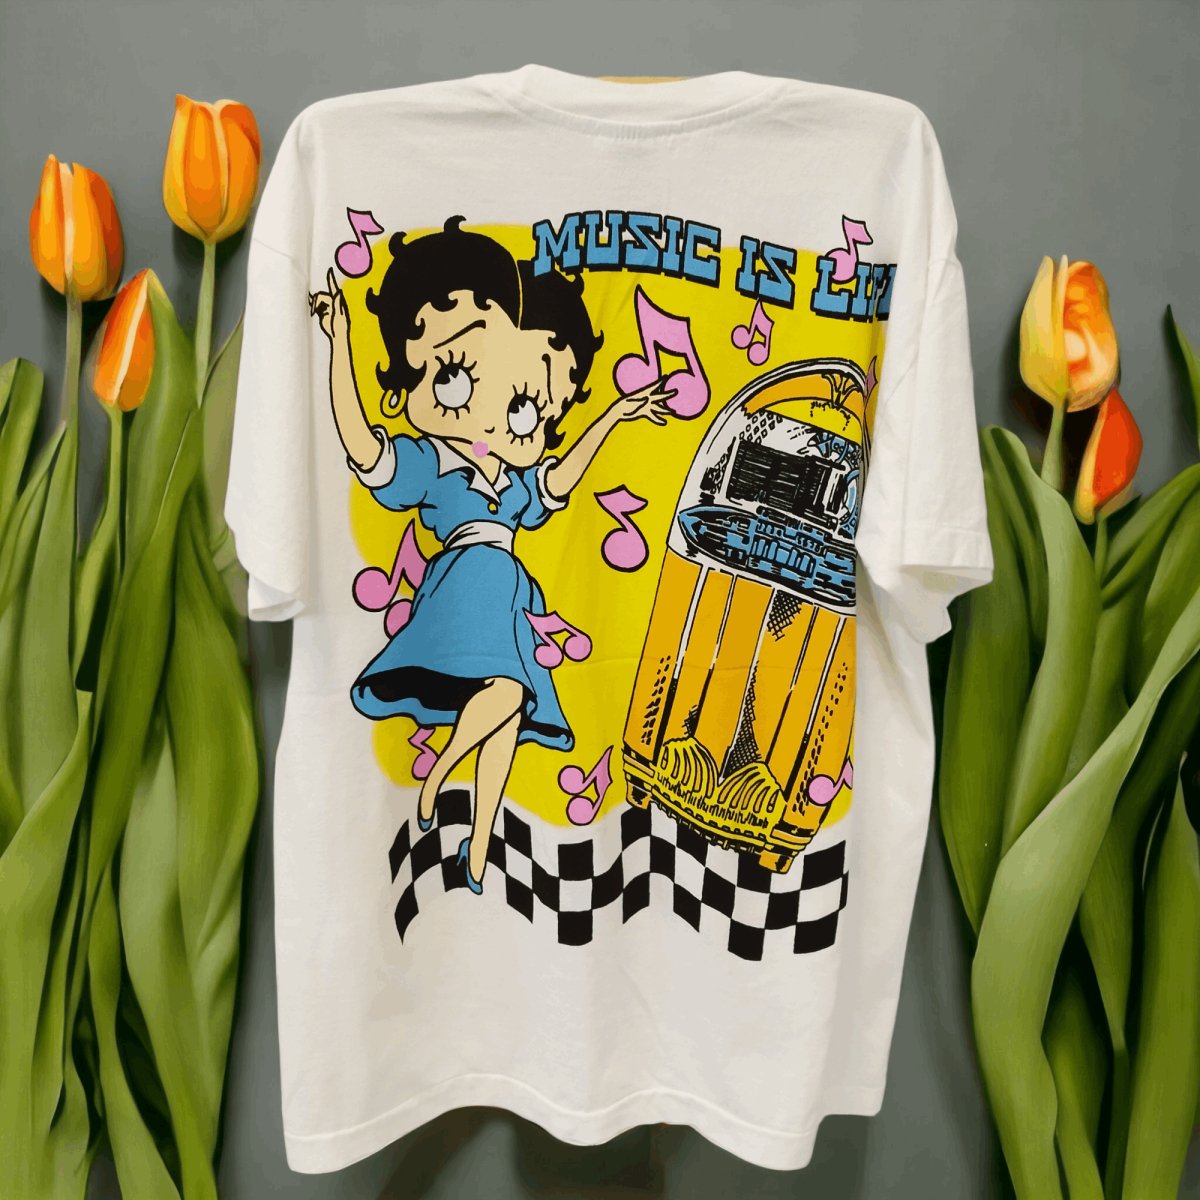 Betty Boop Boop Oop A Doop Music is Life T Shirt - Vintage Band Shirts